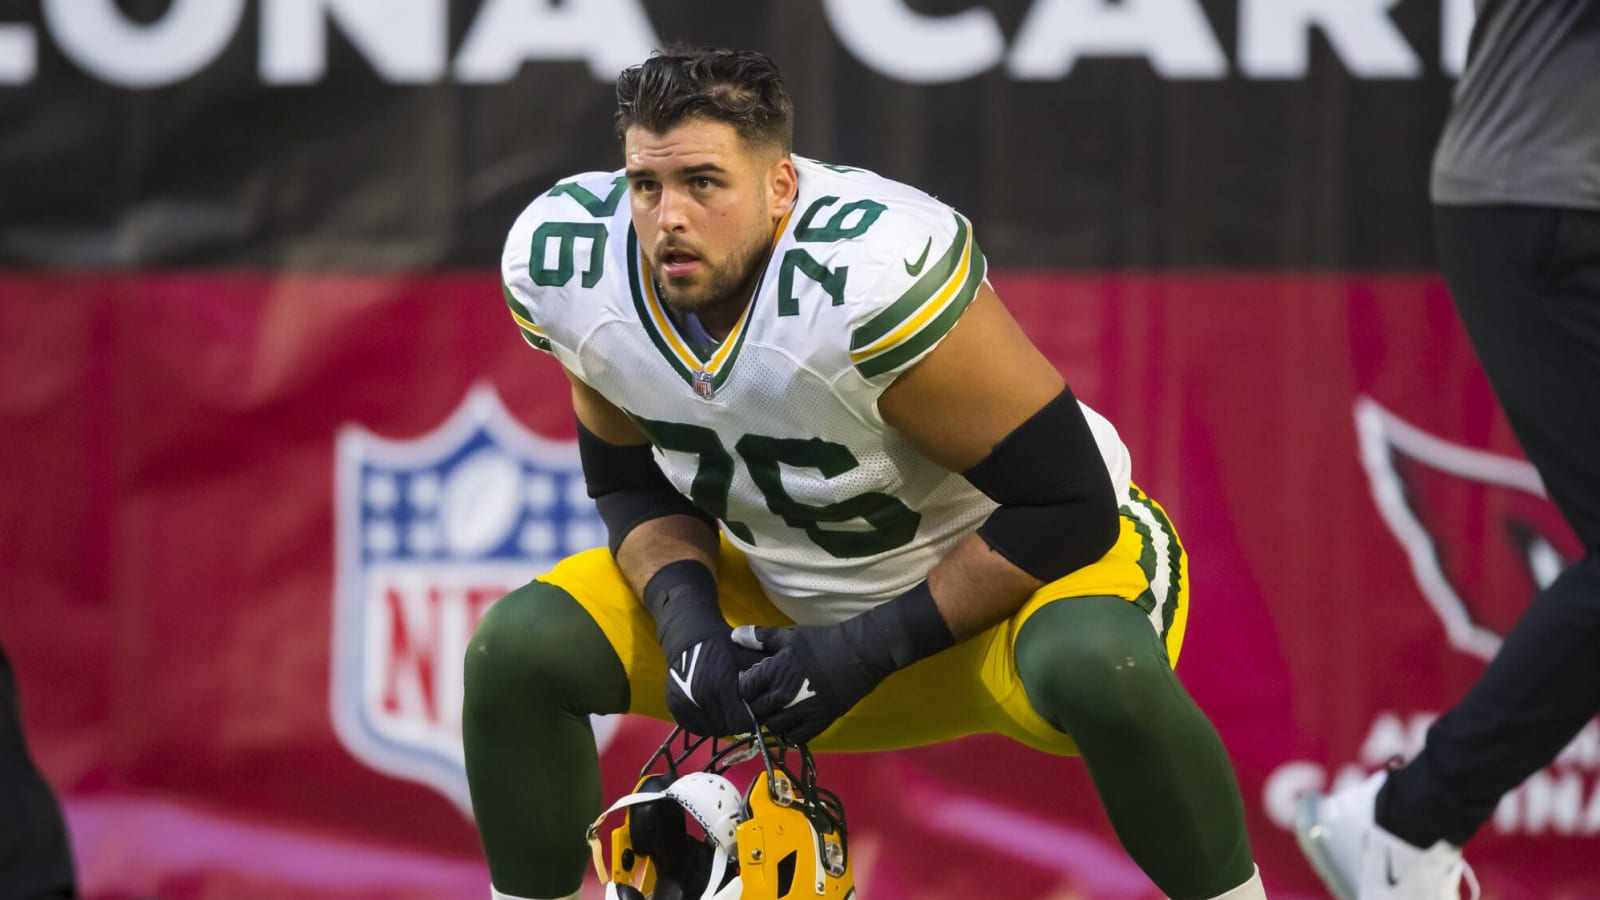 Packers In Discussion with Potential Free Agent to Stay in Green Bay